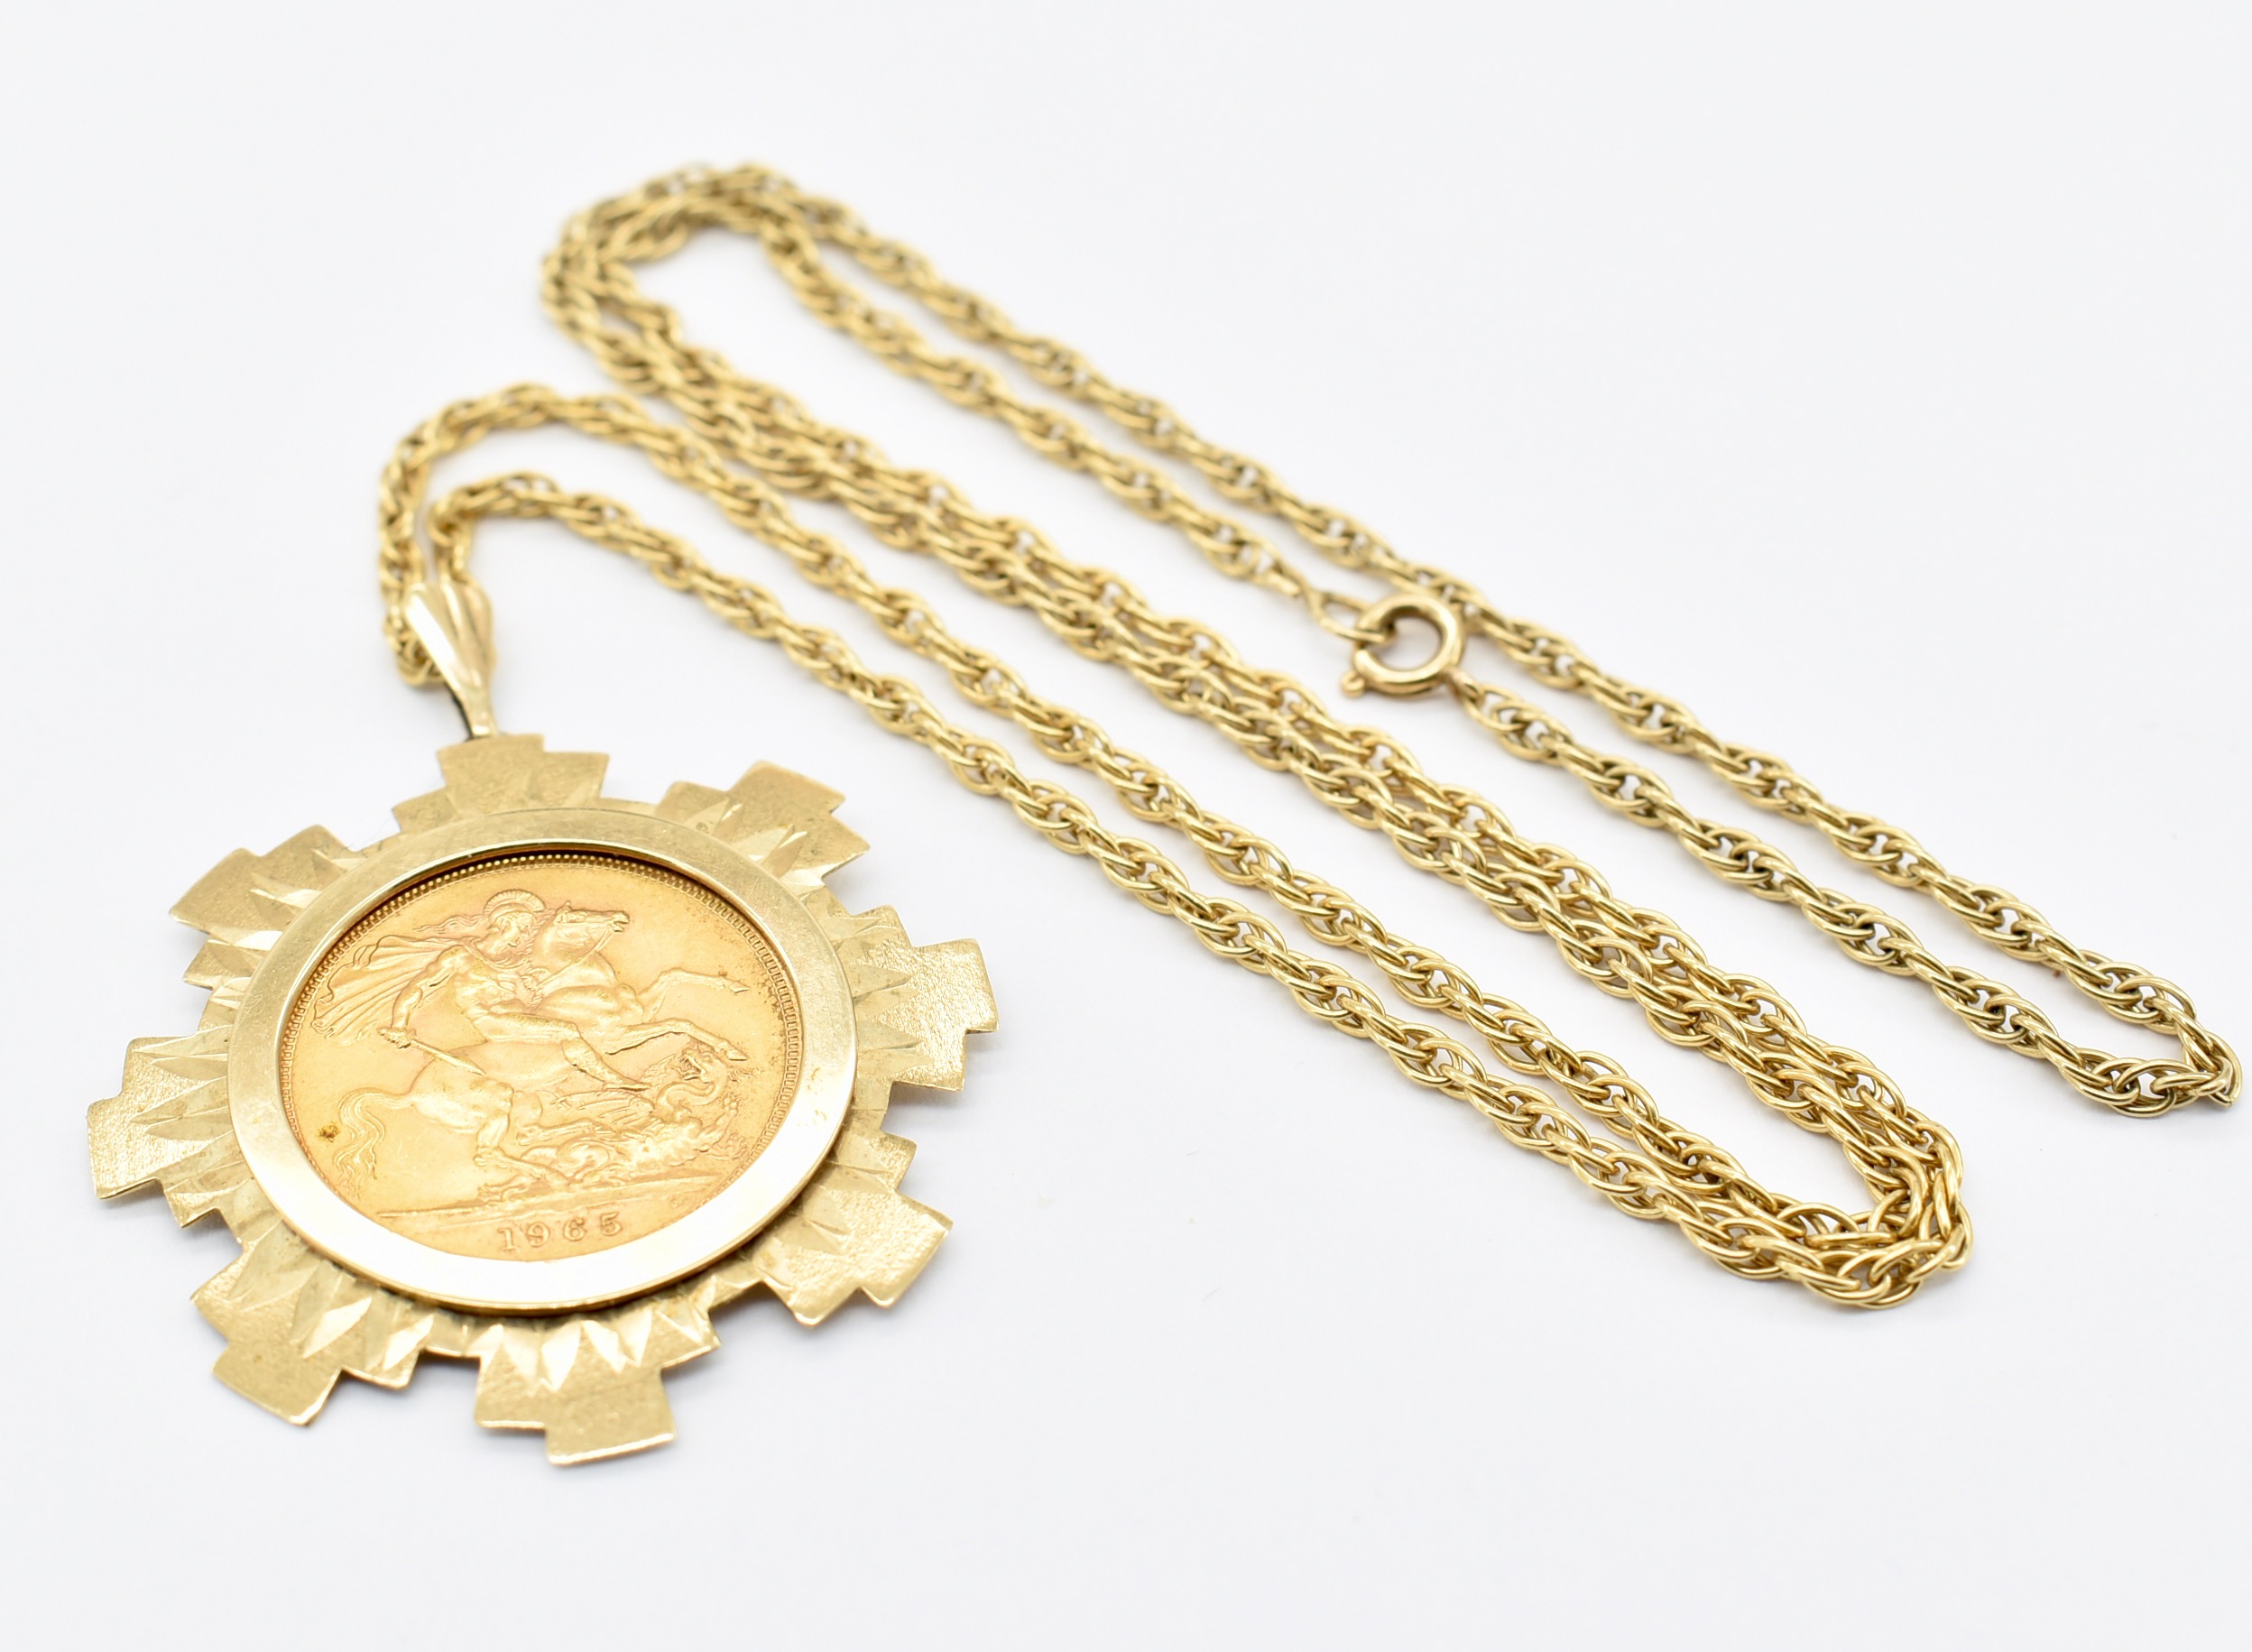 MOUNTED 1965 FULL GOLD SOVEREIGN PENDANT NECKLACE - Image 4 of 5